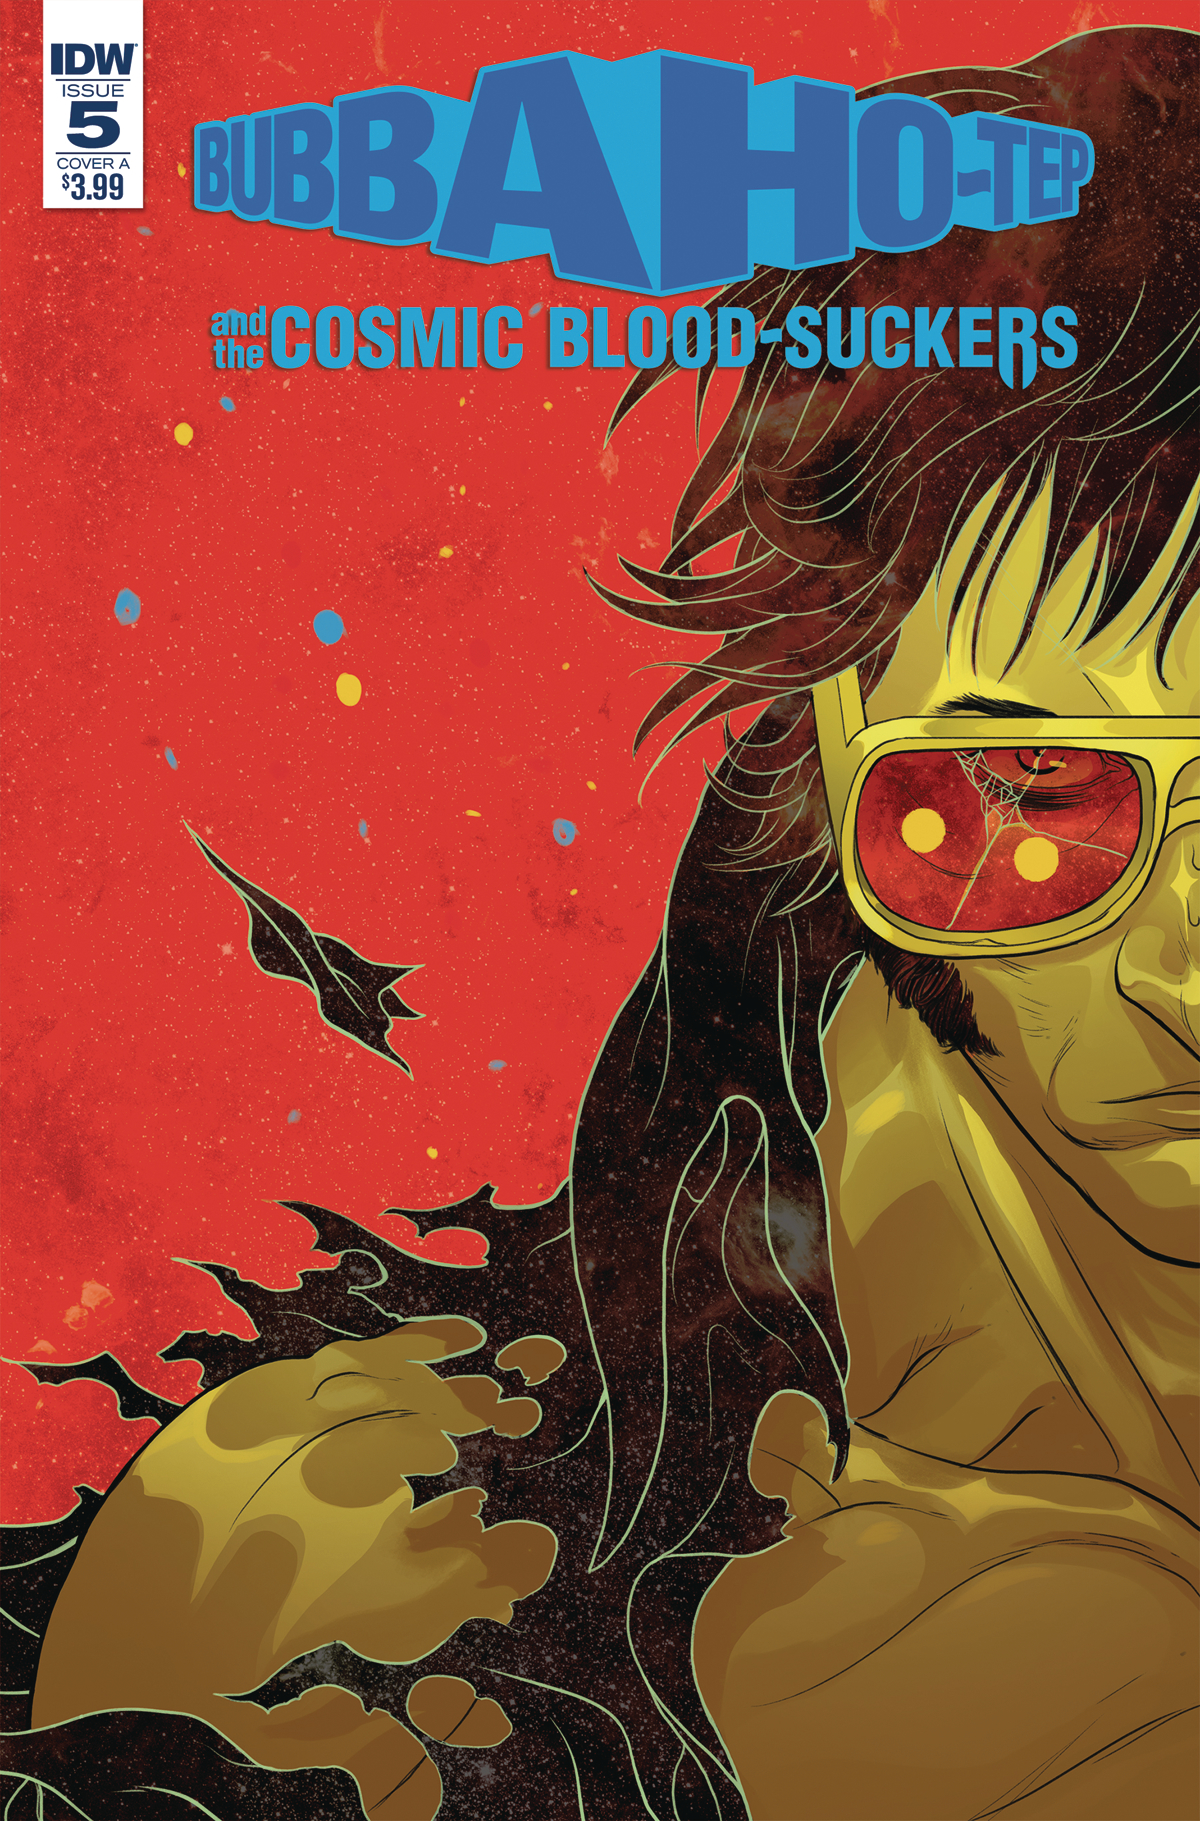 Bubba Ho Tep and the Cosmic Bloodsuckers no. 5 (2018 Series)